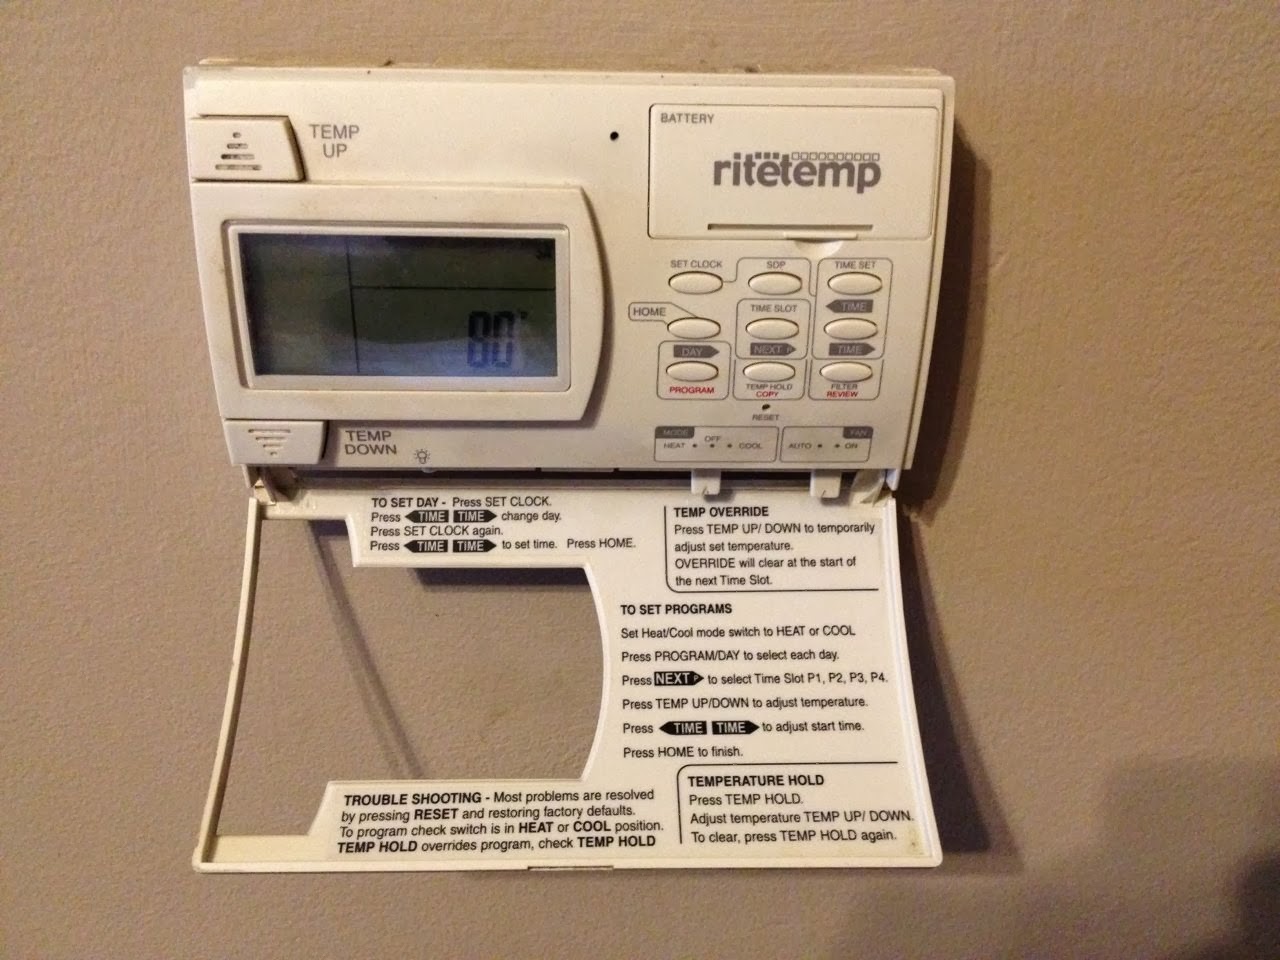 How to Program a Ritetemp Model 8050 Thermostat · Share Your Repair